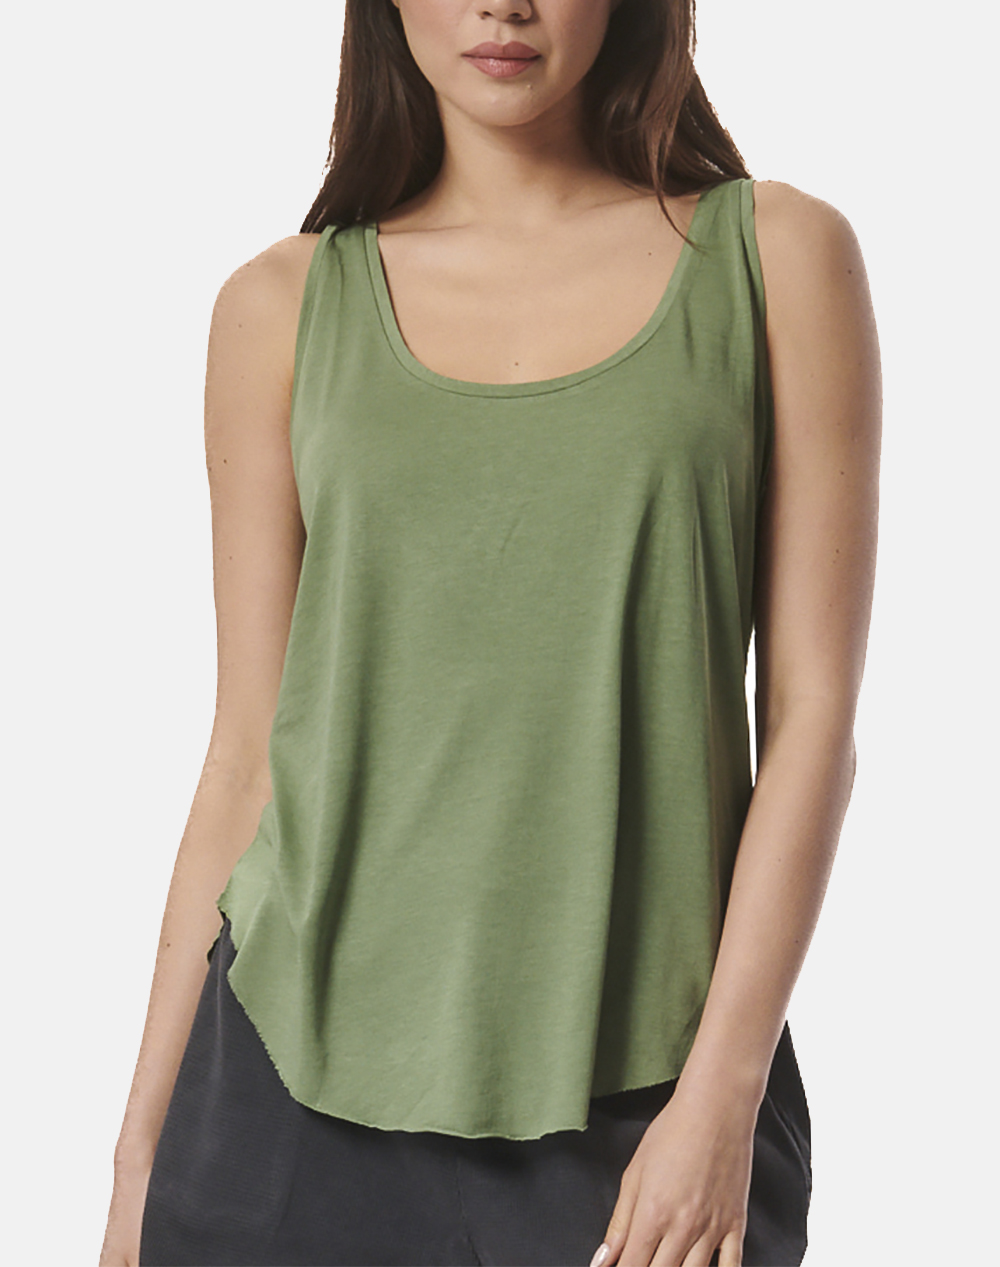 BODY ACTION WOMEN”S NATURAL DYE TANK TOP 041423-01-Hedge Green Olive 3810PBODY3460008_XR03923